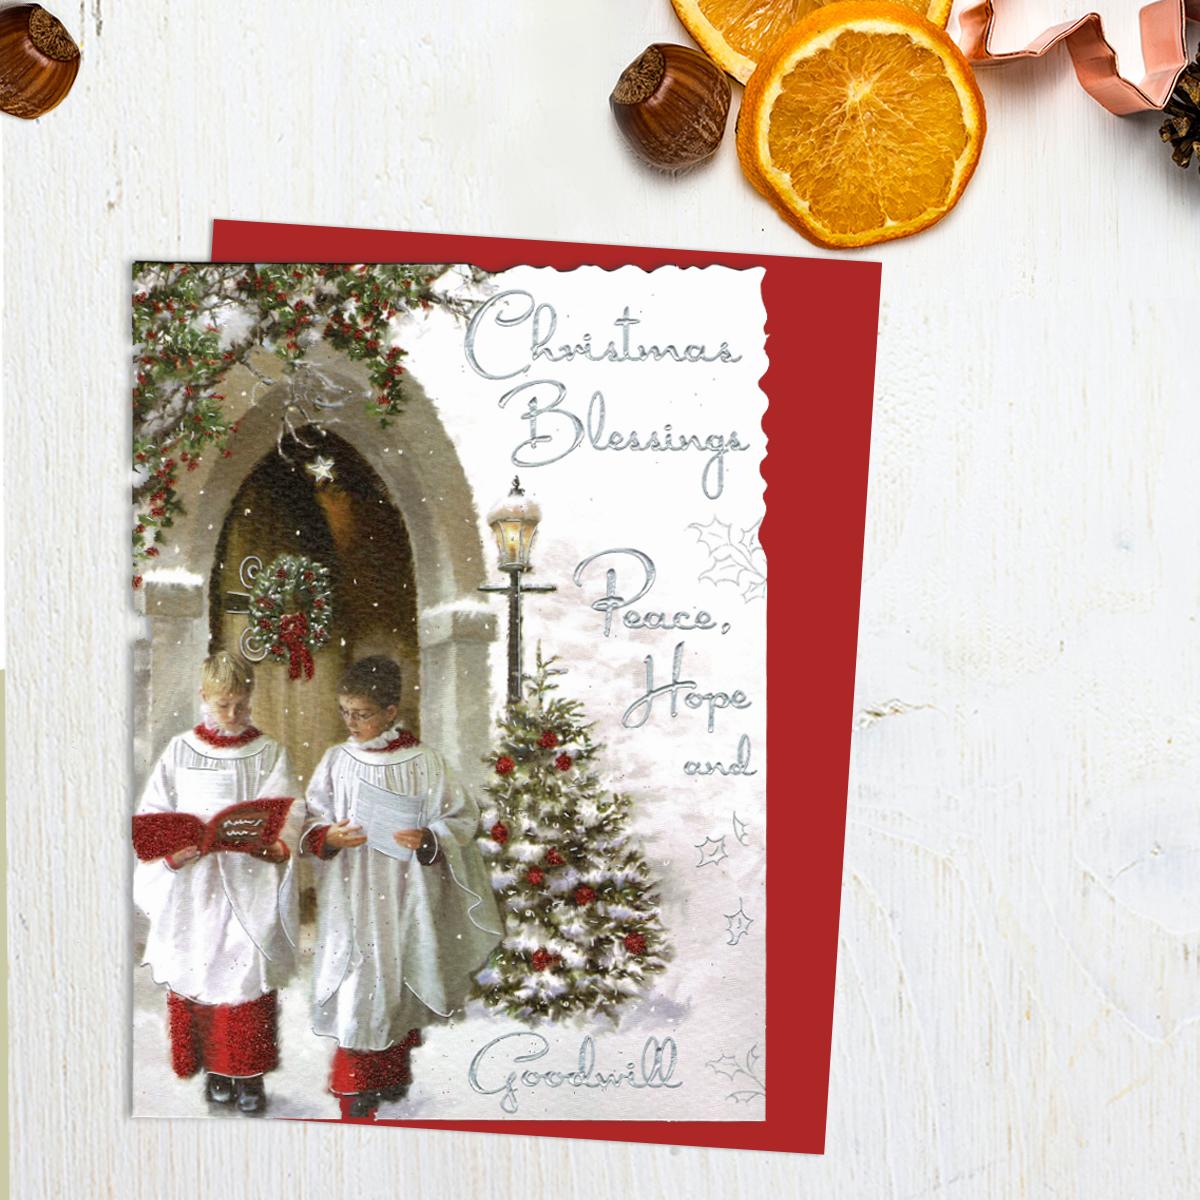 Christmas Blessings Greeting Card Alongside Its Red Envelope